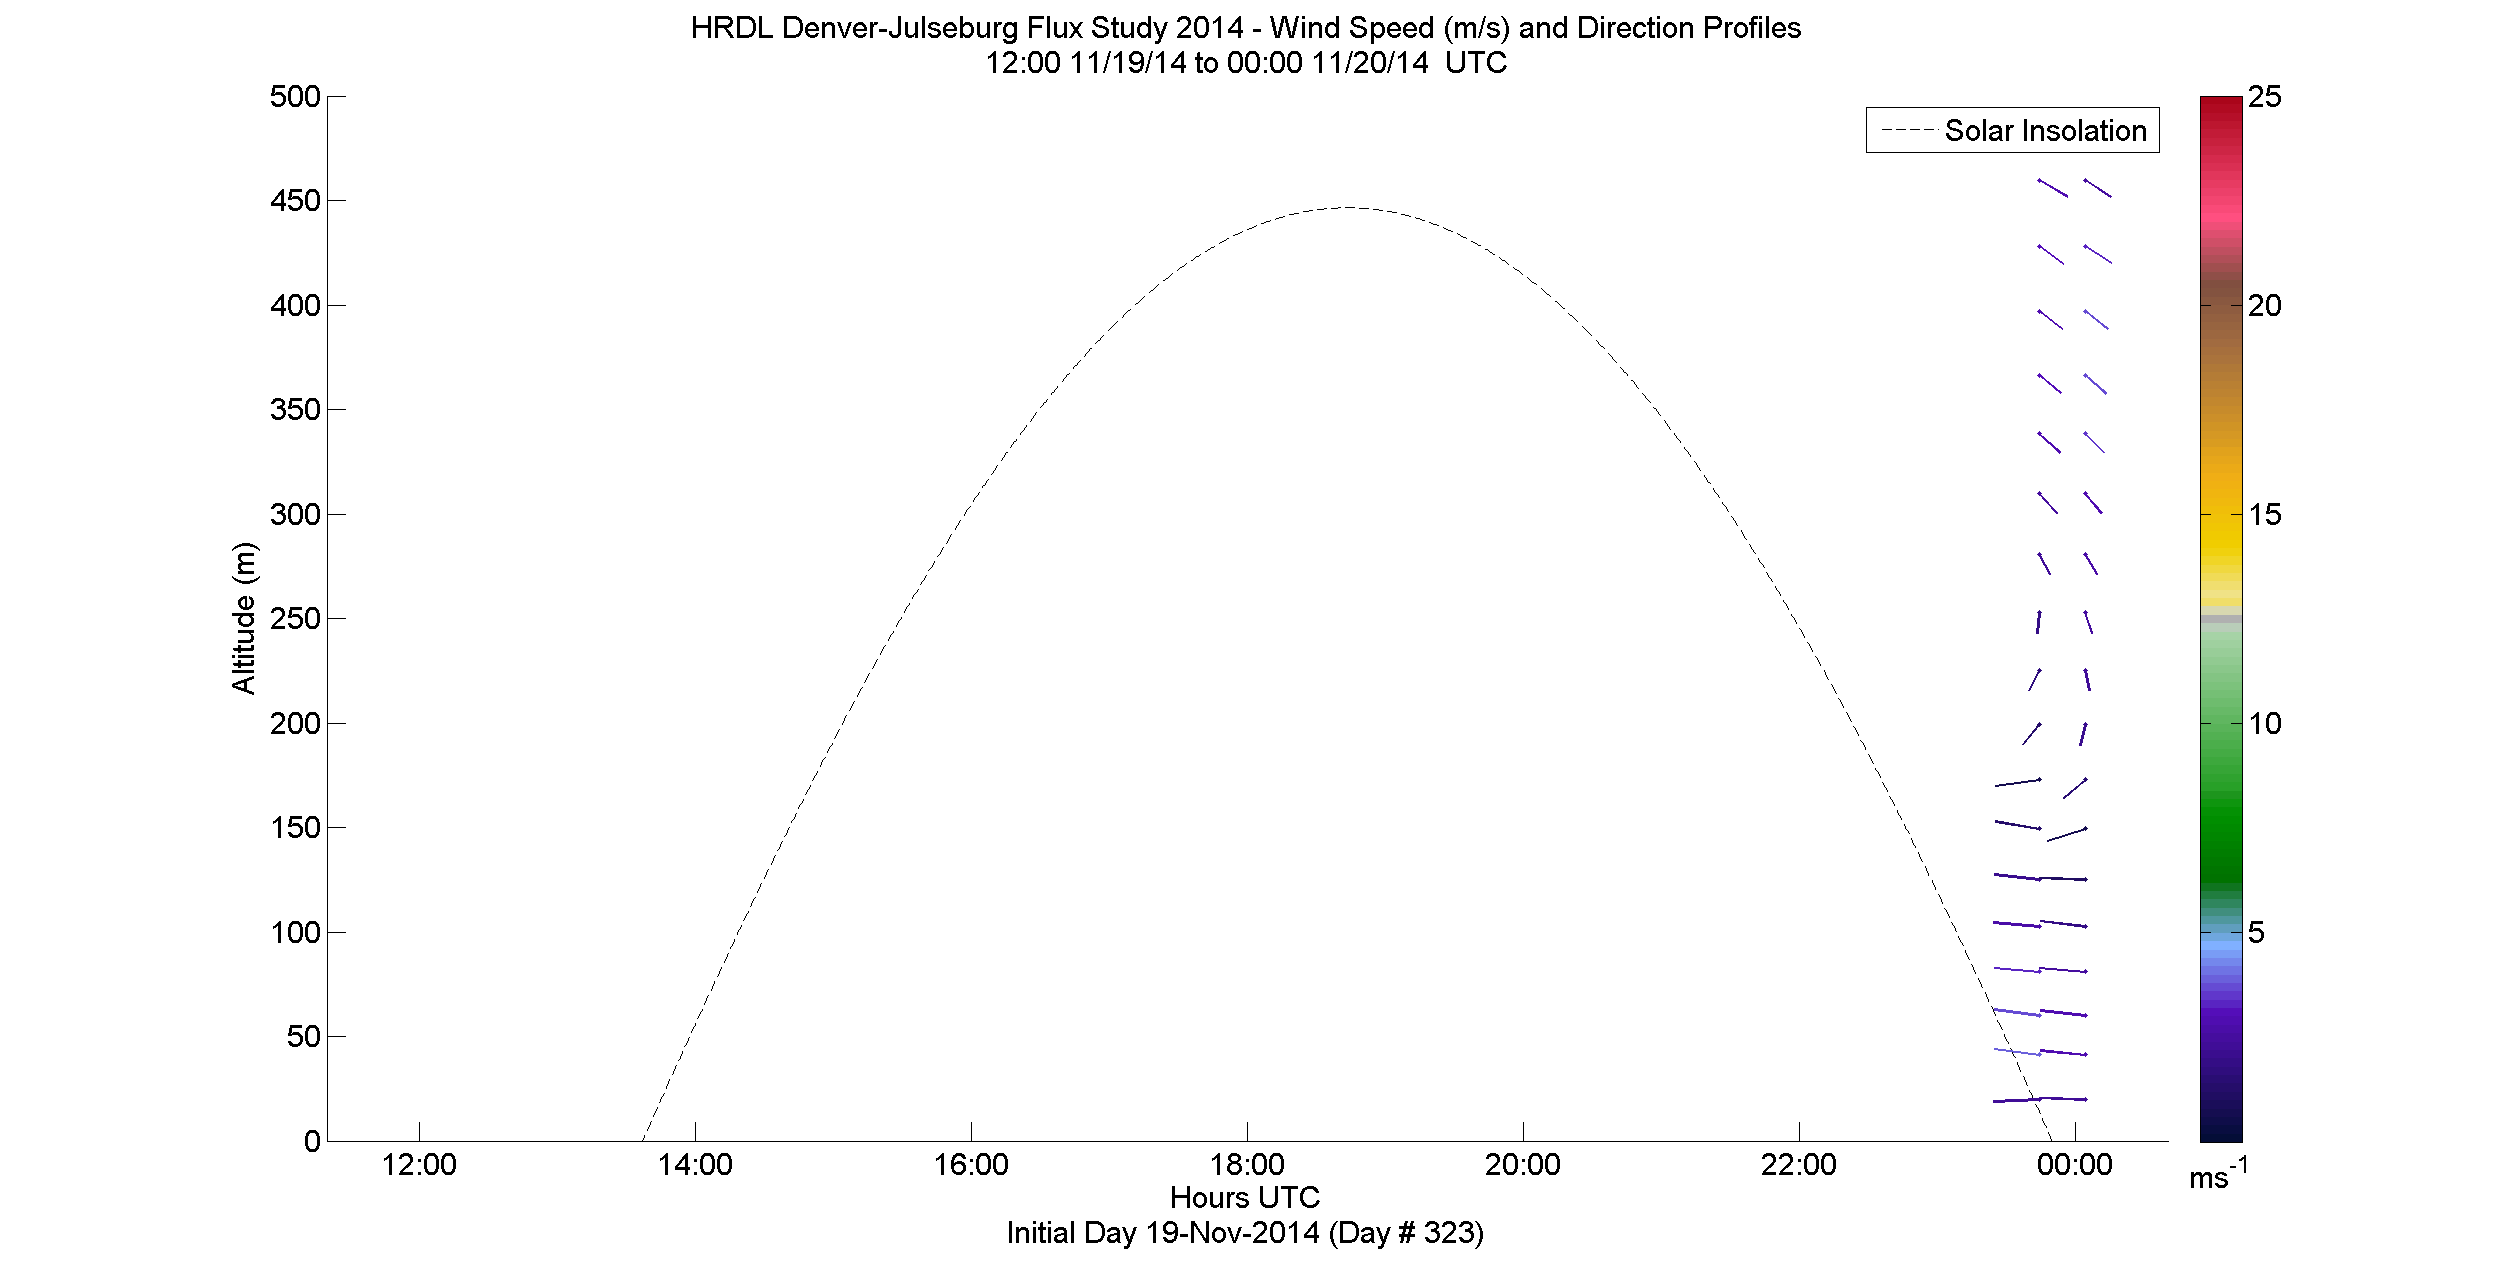 HRDL speed and direction profile - November 19 pm